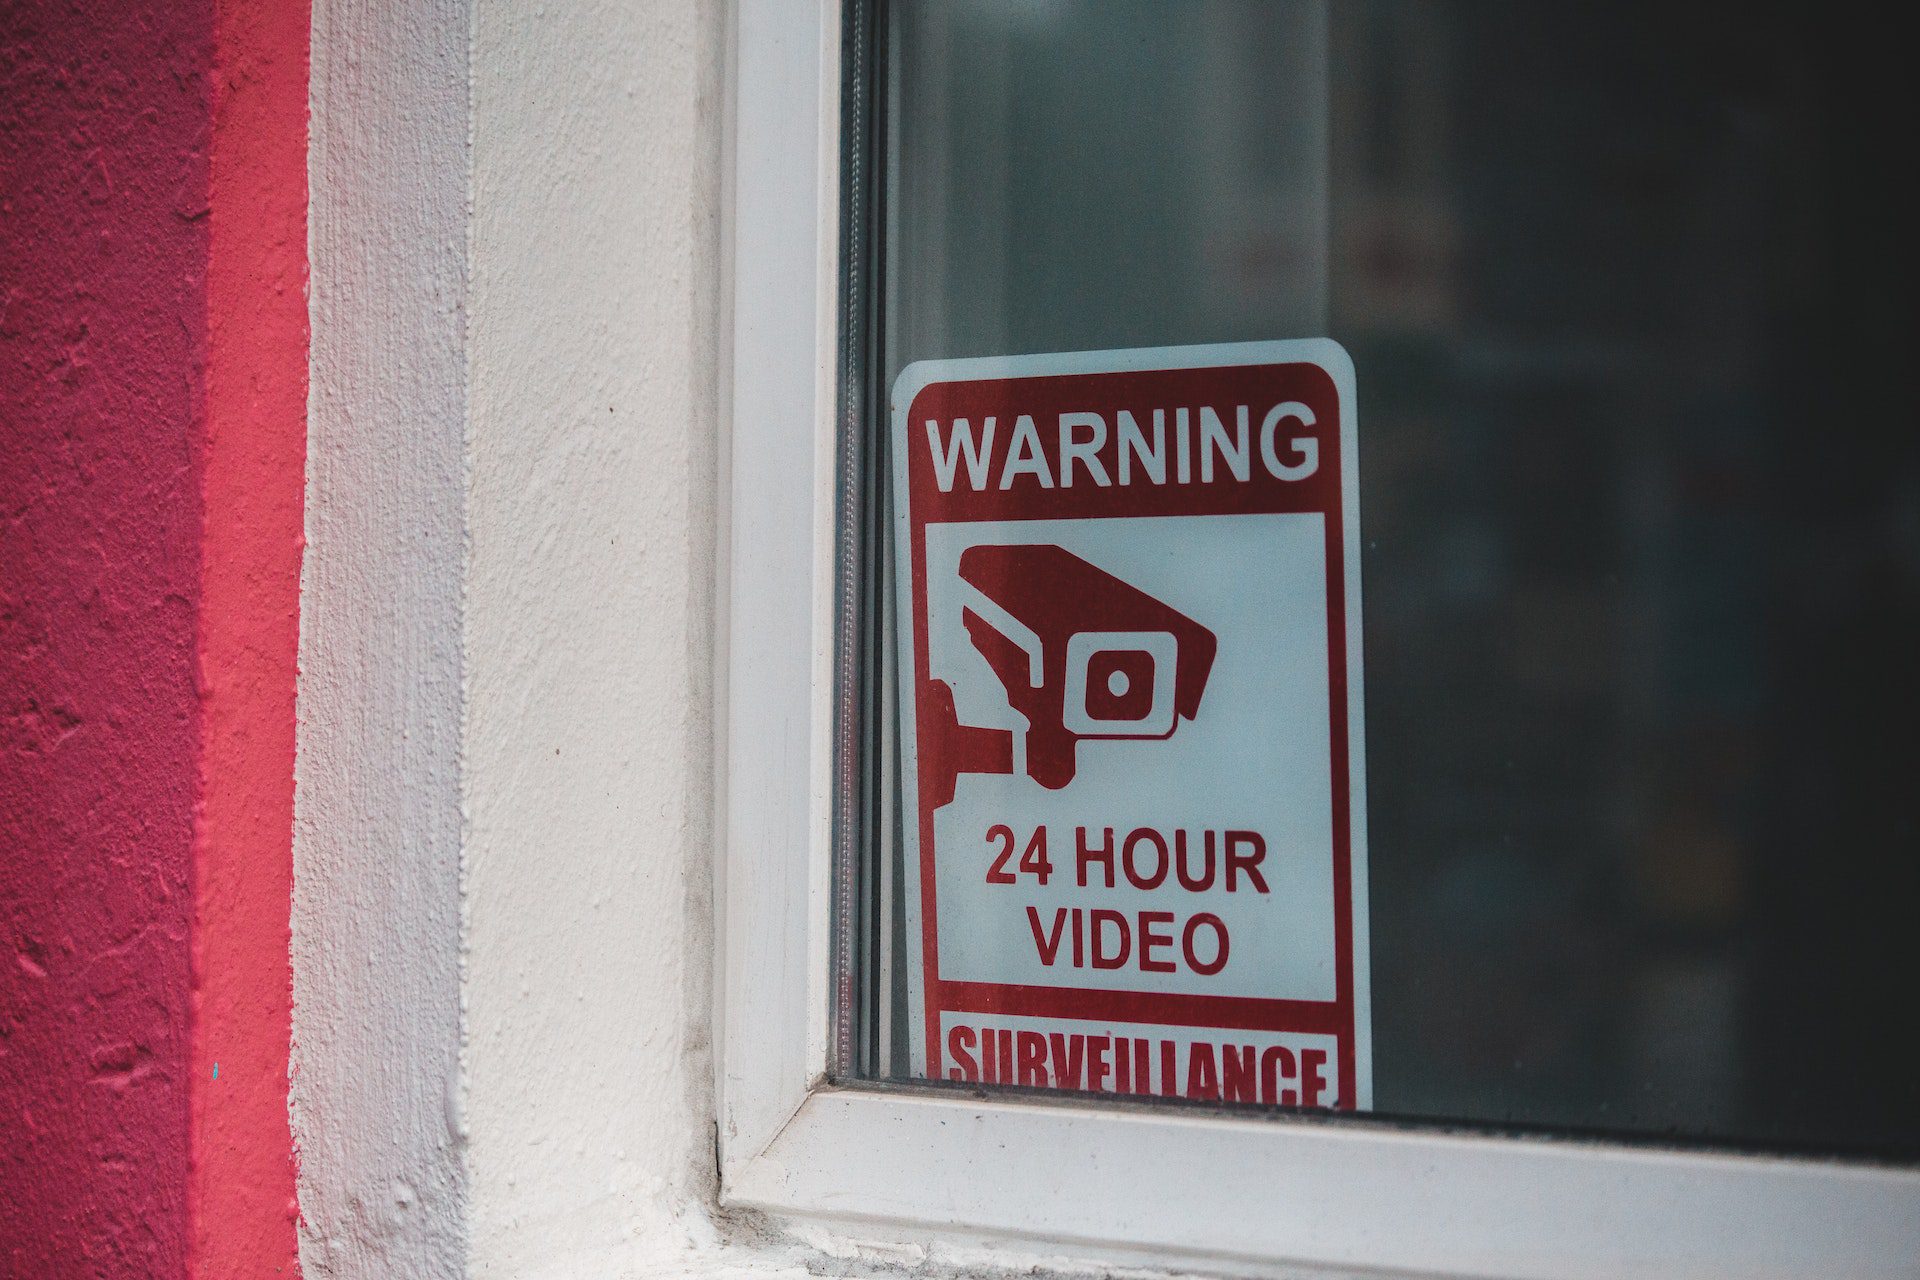 Sign in a window with warning “24-hour video surveillance”